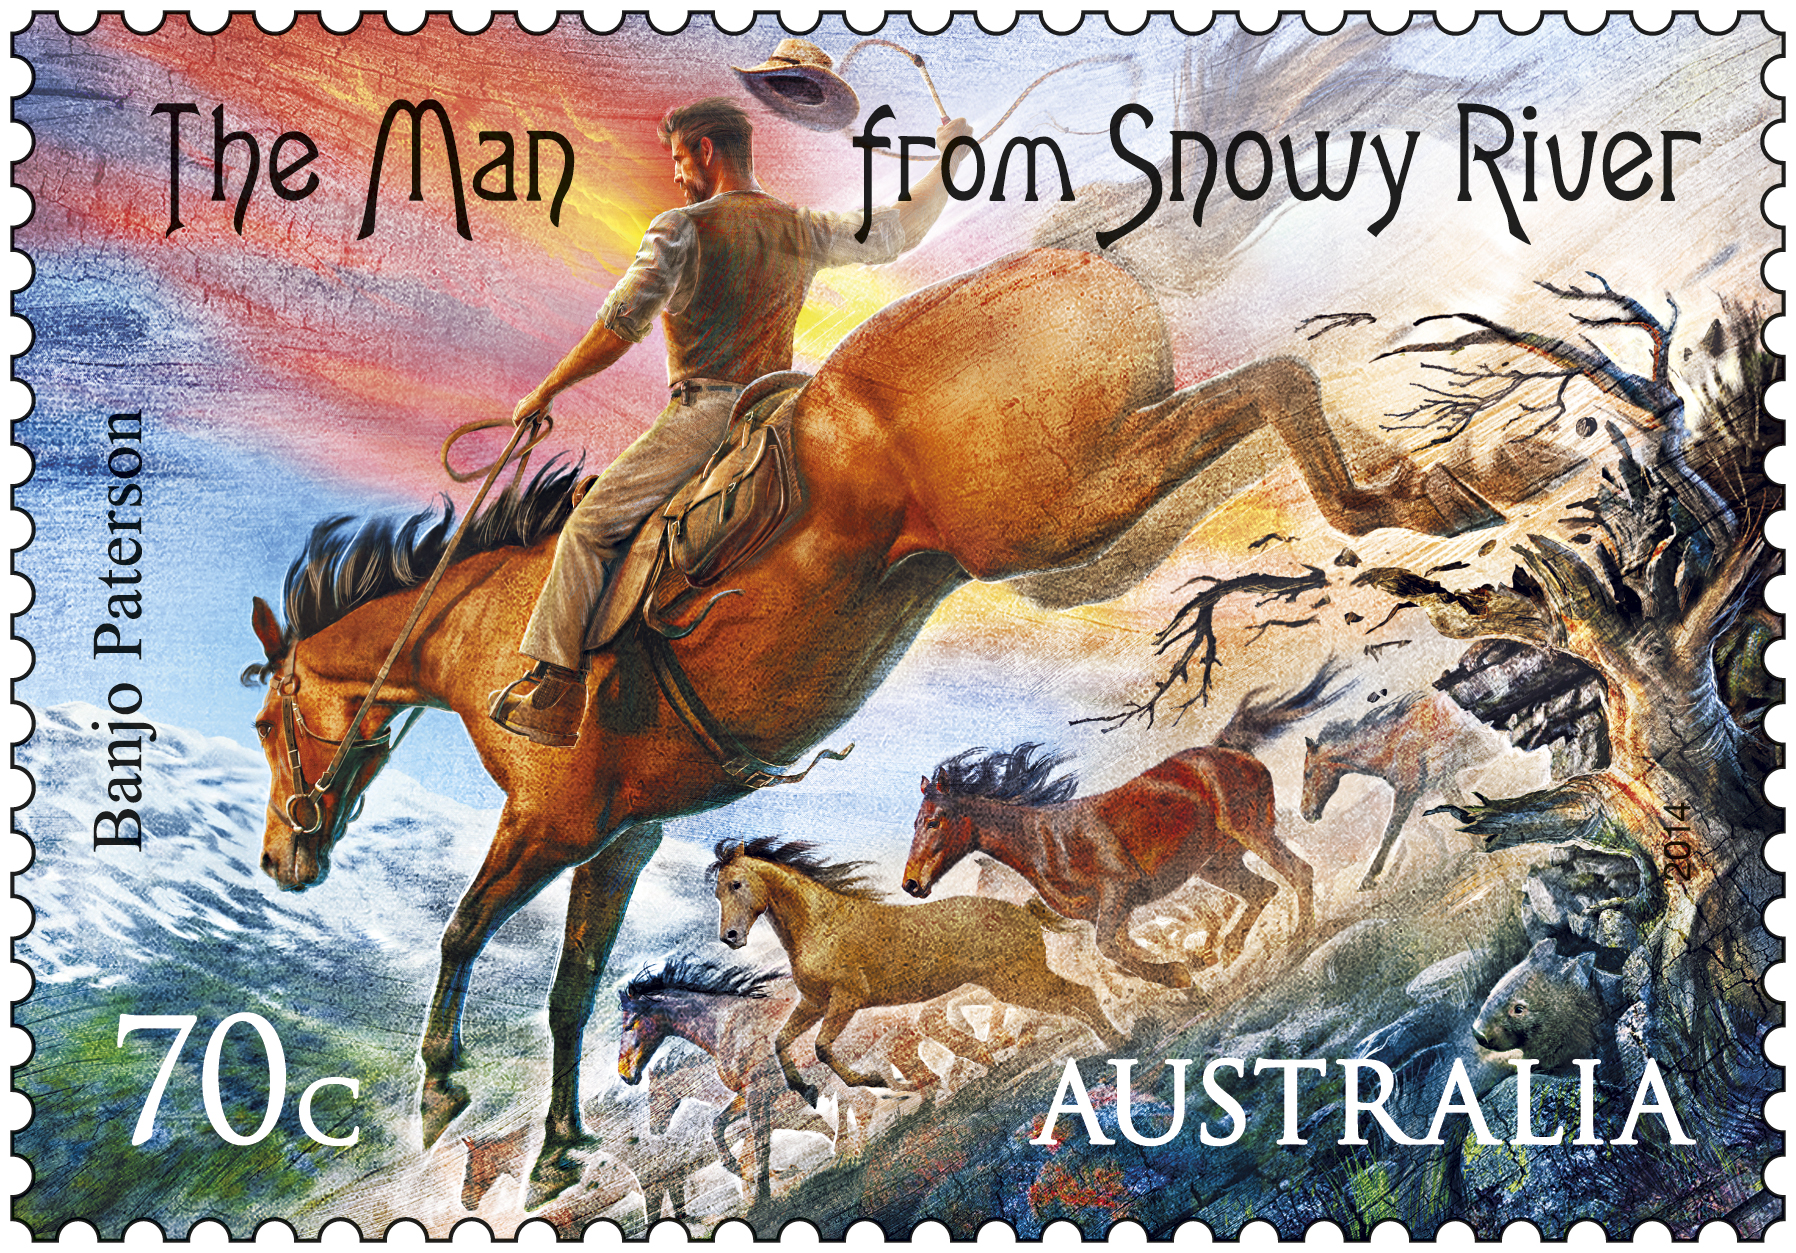 70c Bush Ballads_The Man from Snowy River_2014. * Only to be reproduced with the perforations included.